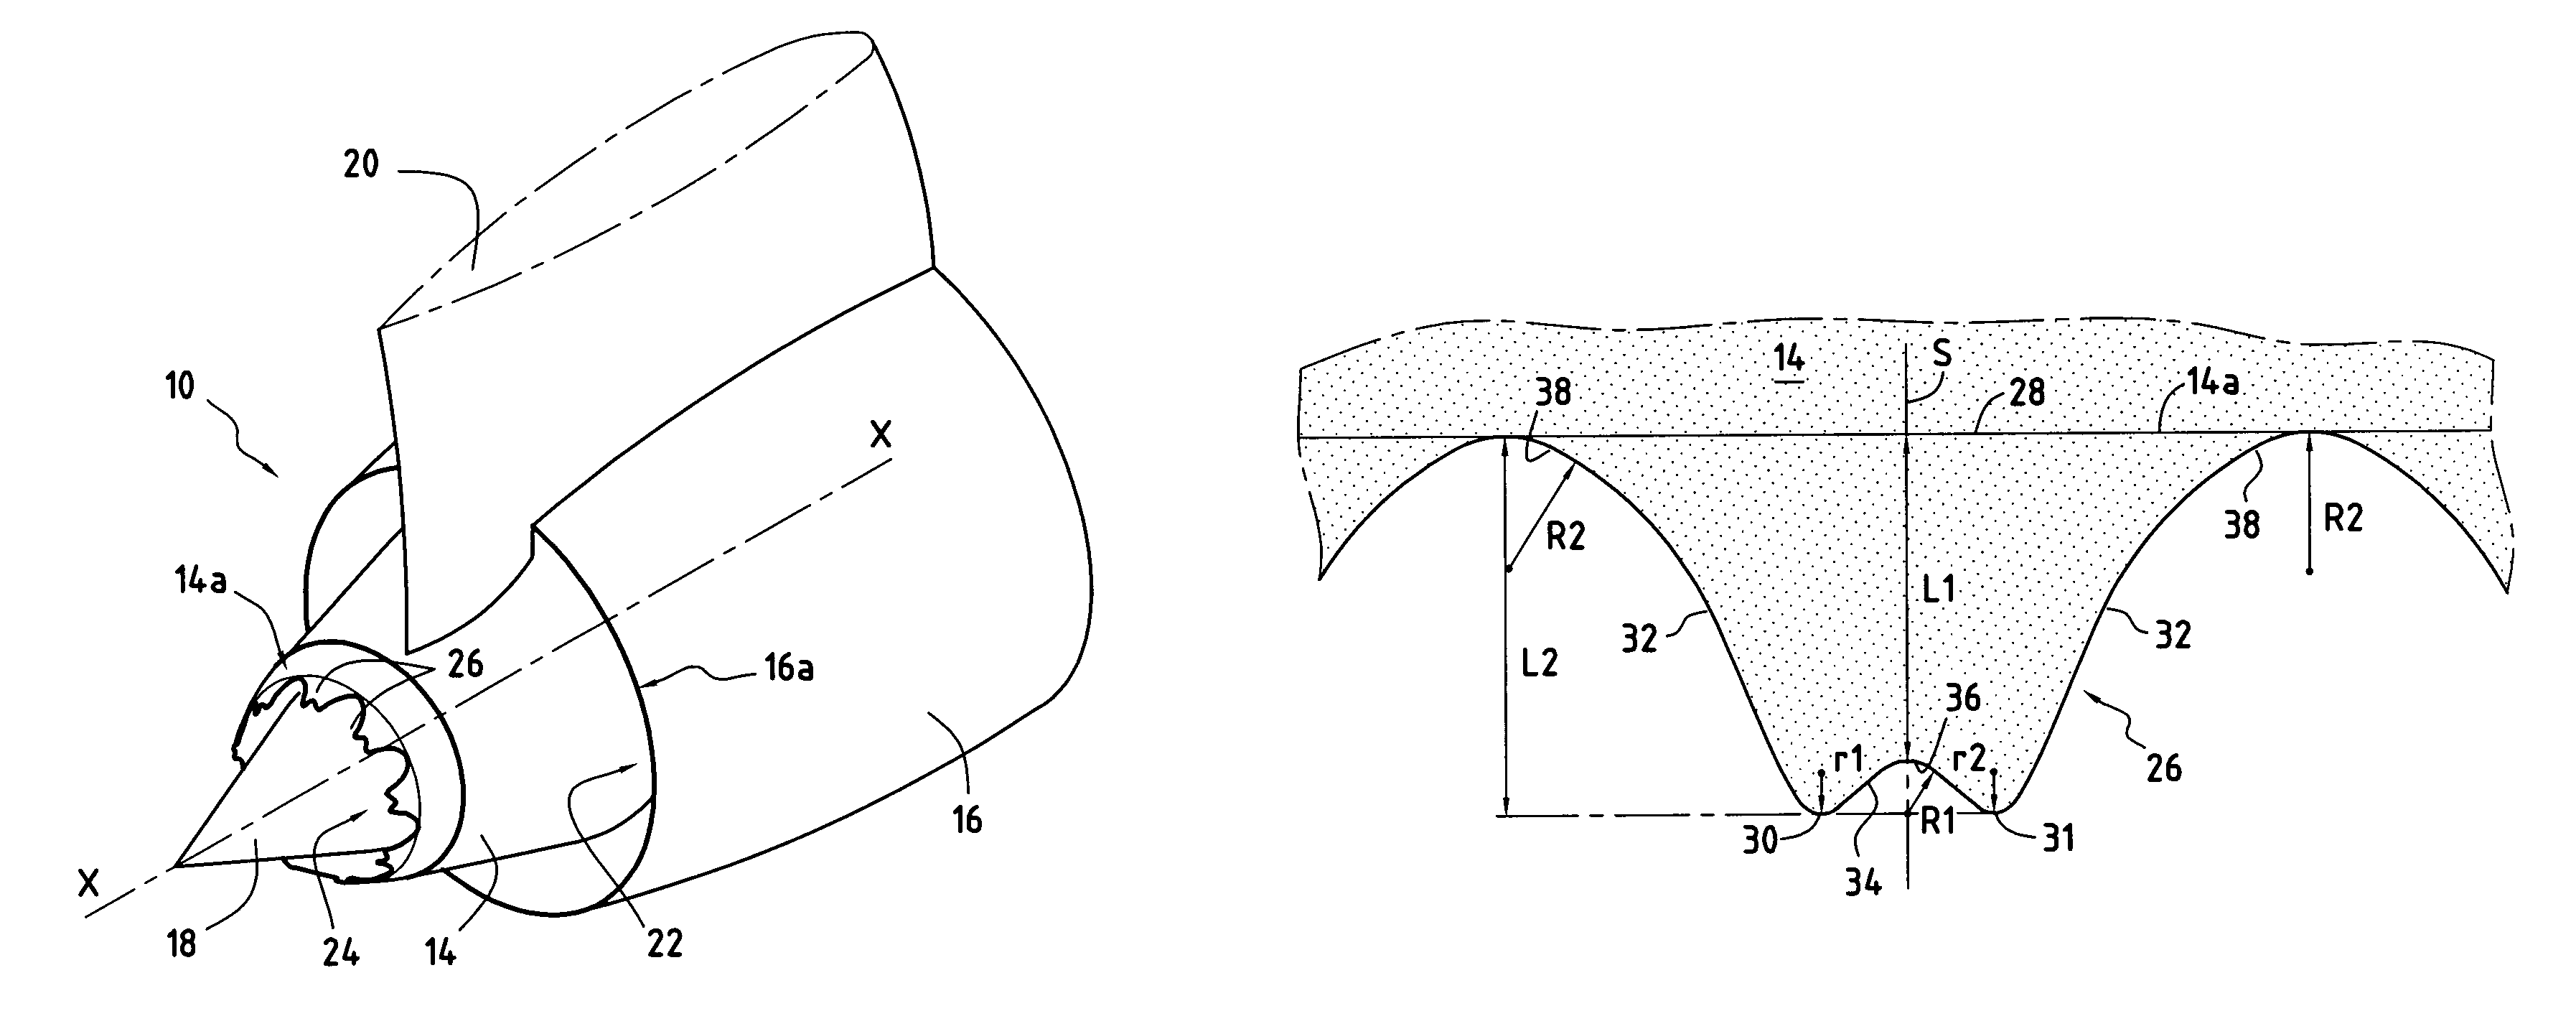 Turbomachine nozzle cover provided with triangular patterns having pairs of vertices for reducing jet noise